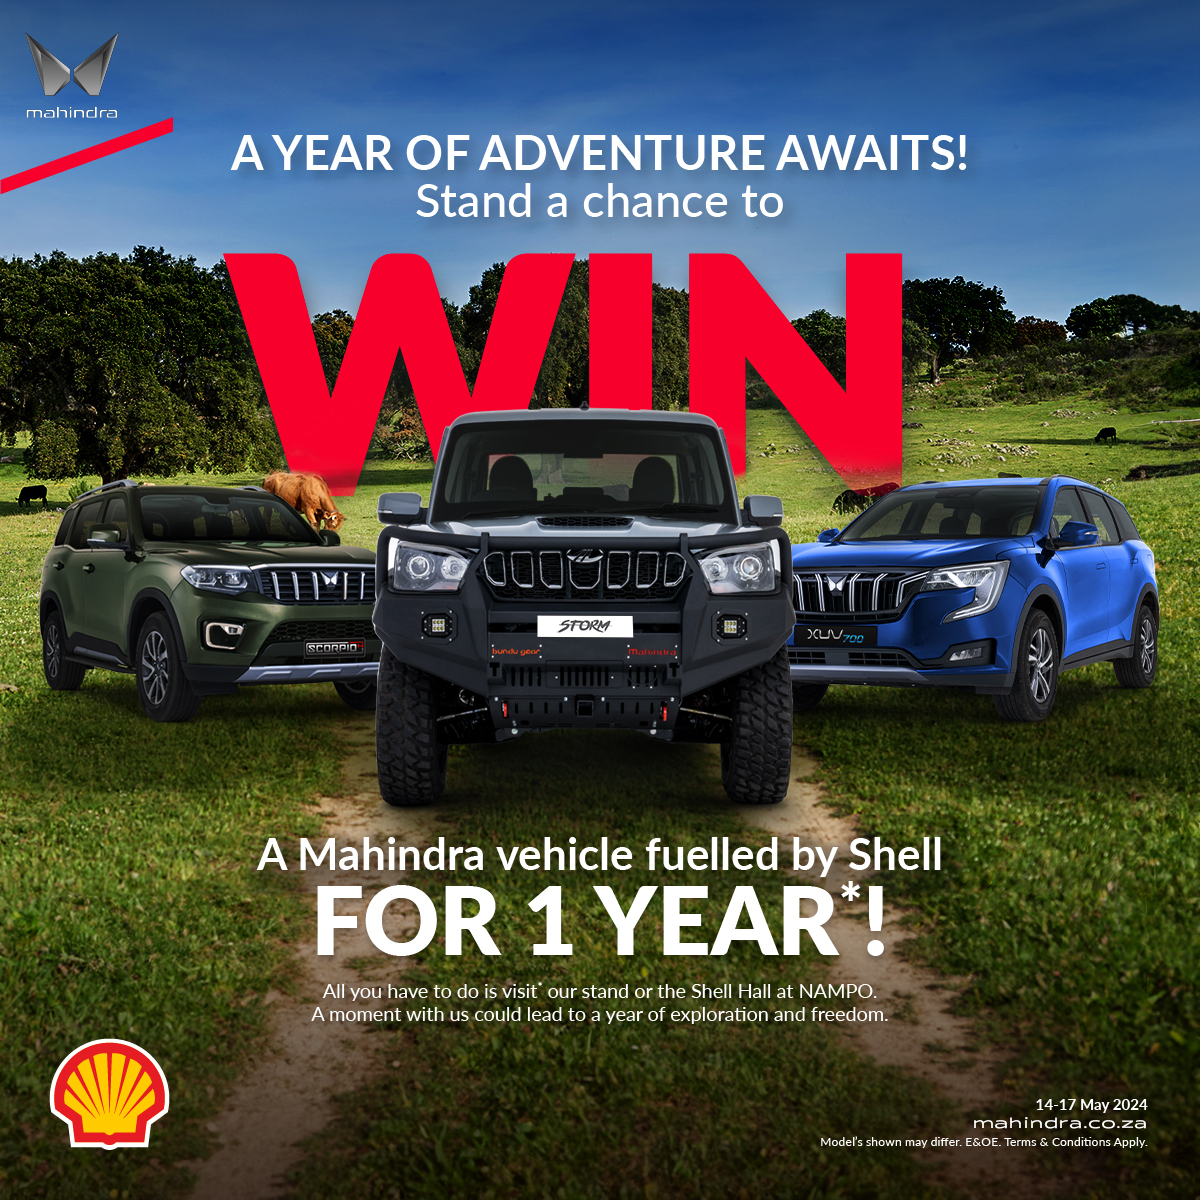 Come to NAMPO and uncover your chance to win with Mahindra and Shell! Join us at the Shell hall or Mahindra stand and you could be the lucky winner of a Mahindra vehicle and a full year of fuel.​ ​ *Terms and conditions apply. ​ ​ #MahindraSA